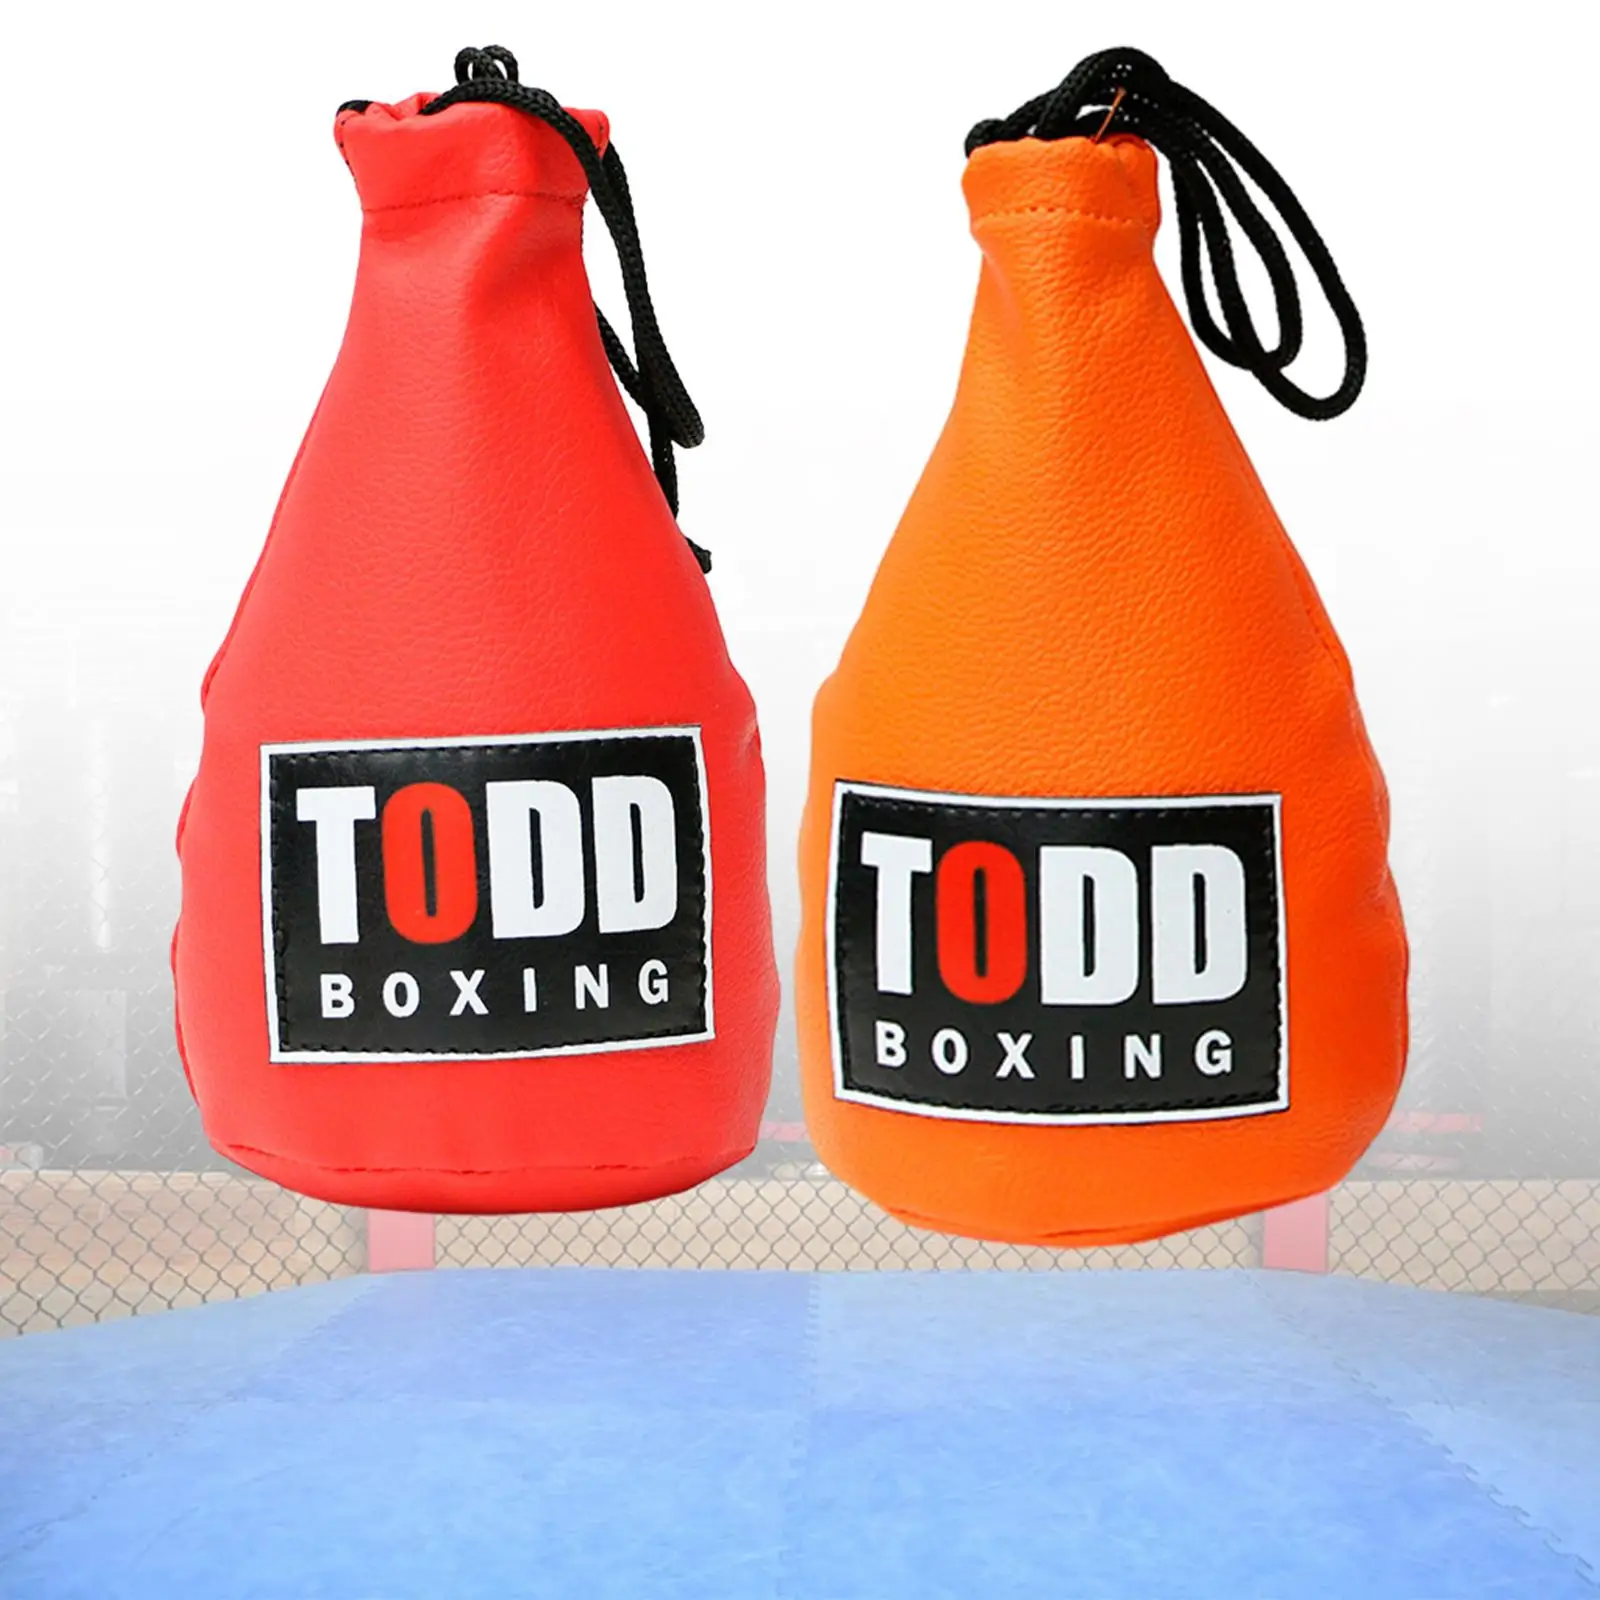 Boxing Punch Bag Punching Bag Equipment Gear Dodge Reaction Bag for Hand Eye Coordination Fight Skill Taekwondo Sports Sparring